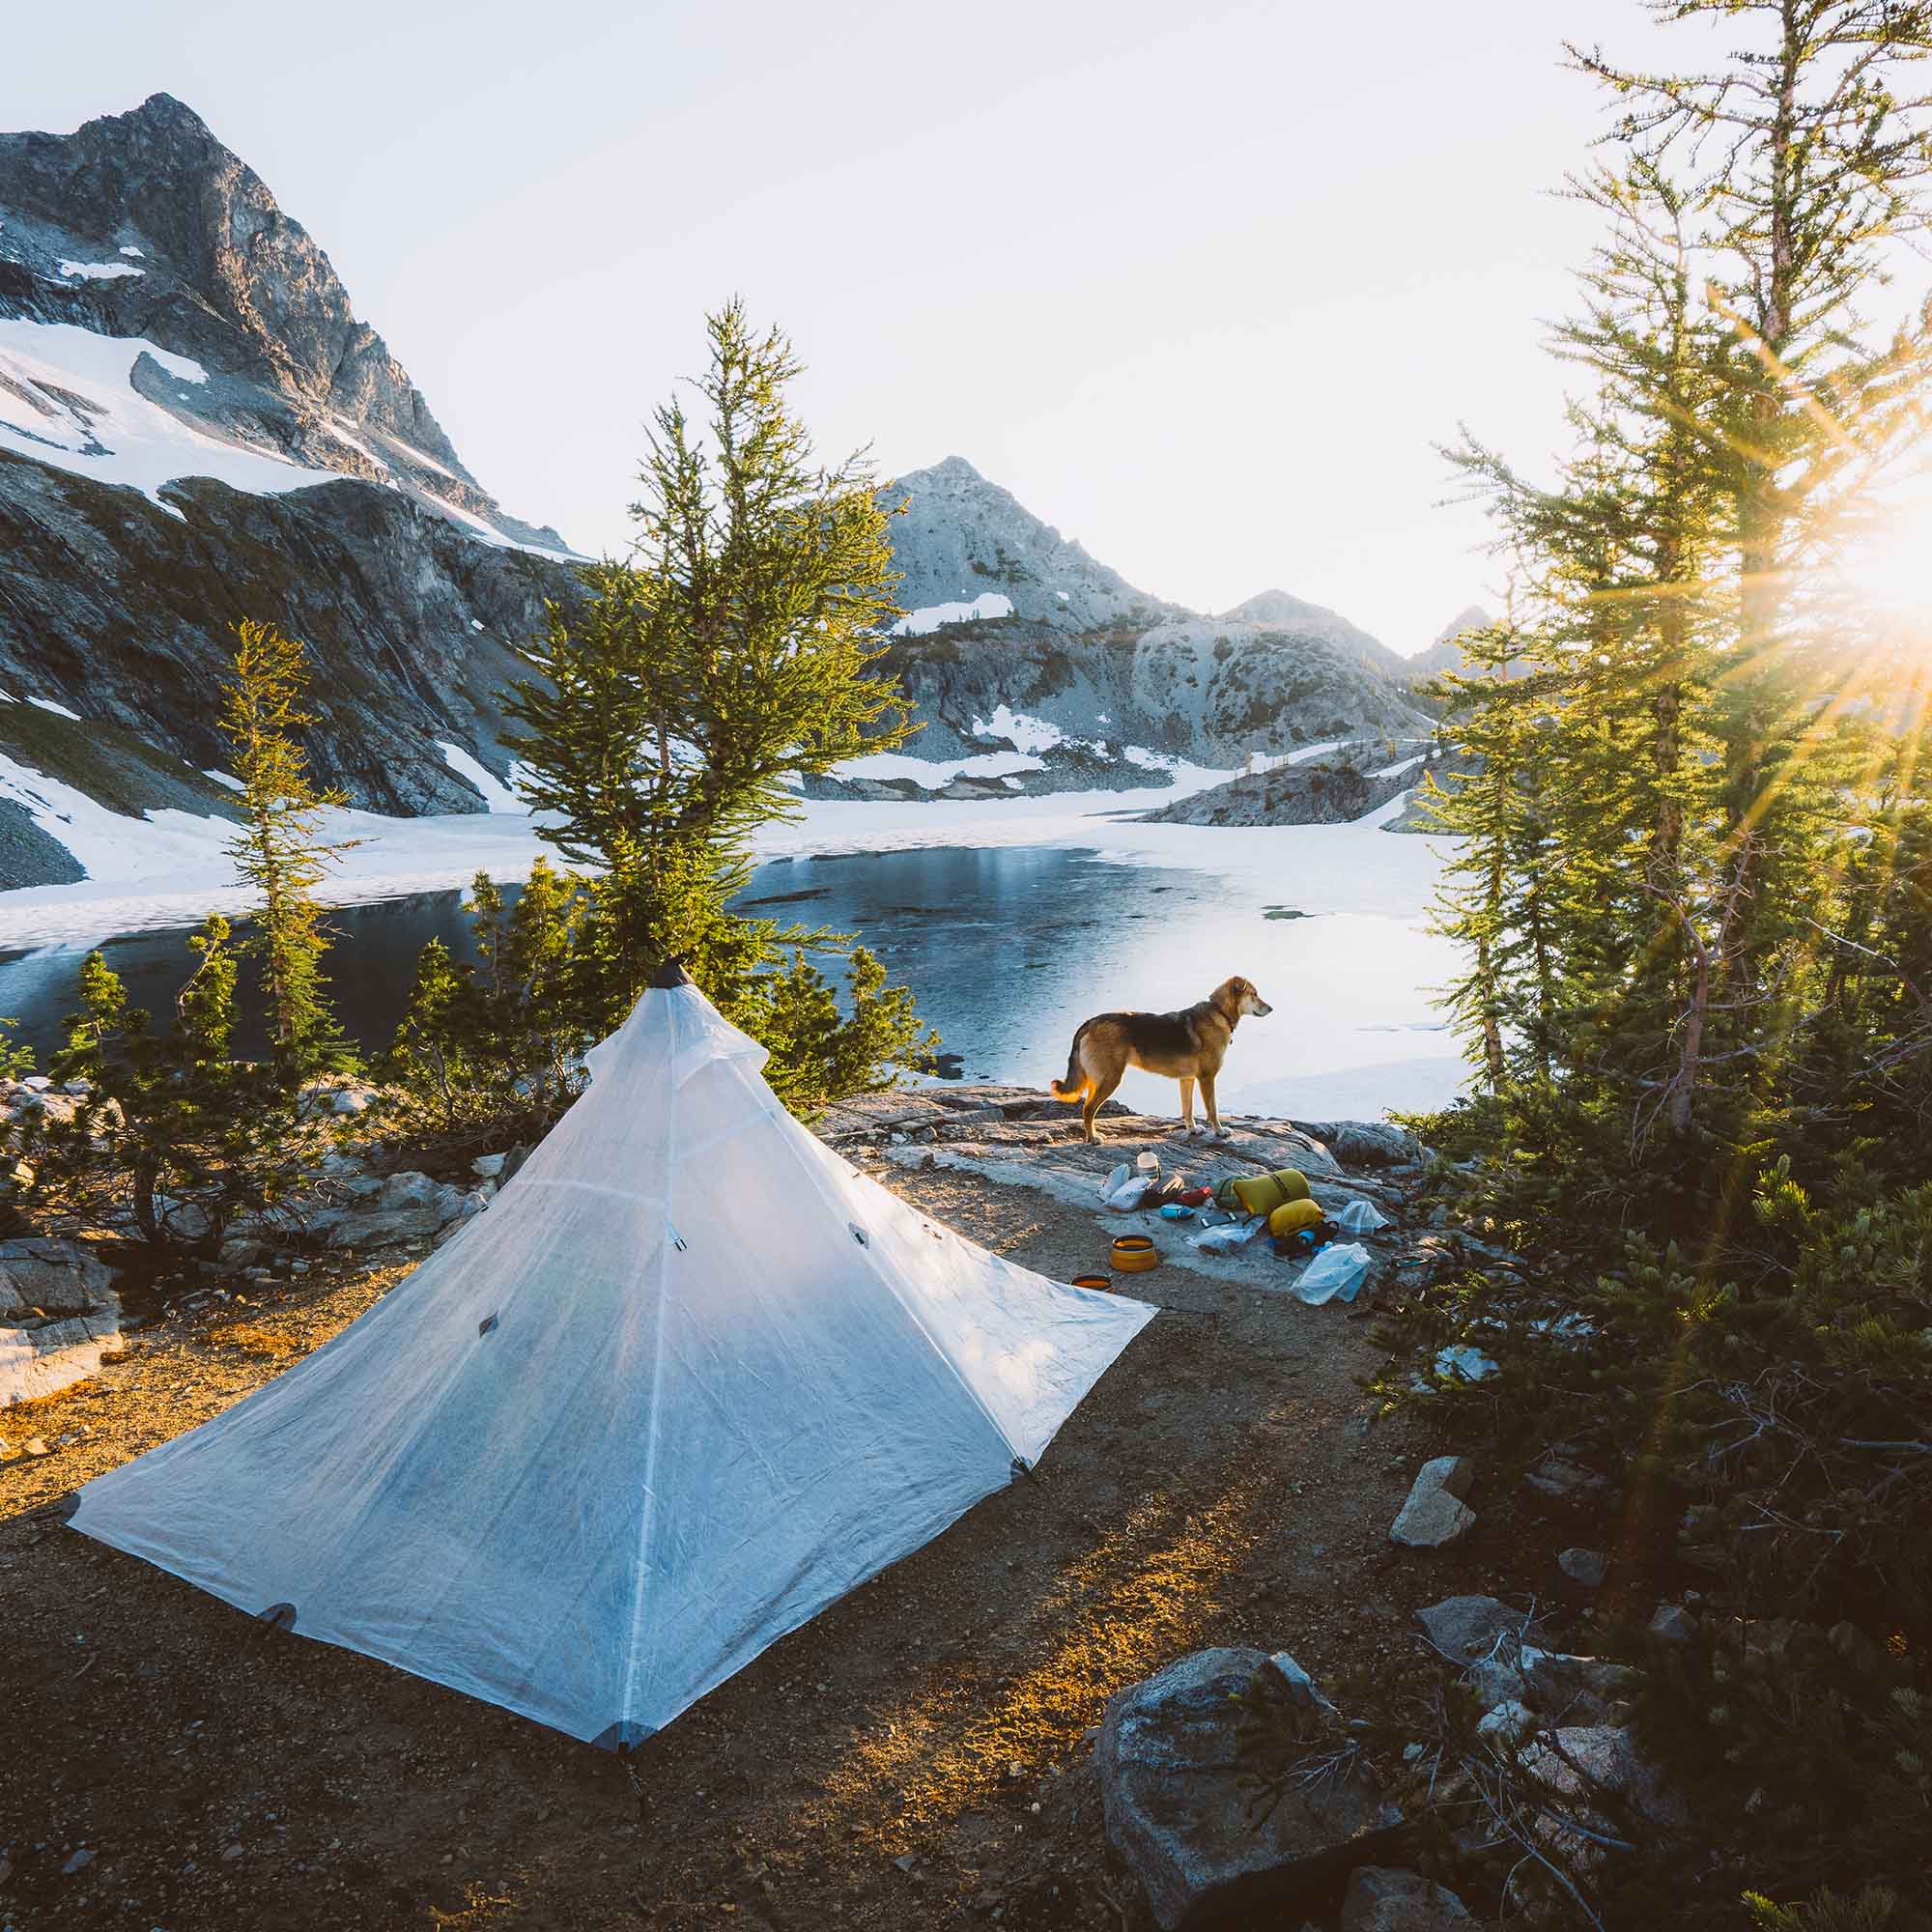 A dog is standing next to a tent near a lake.